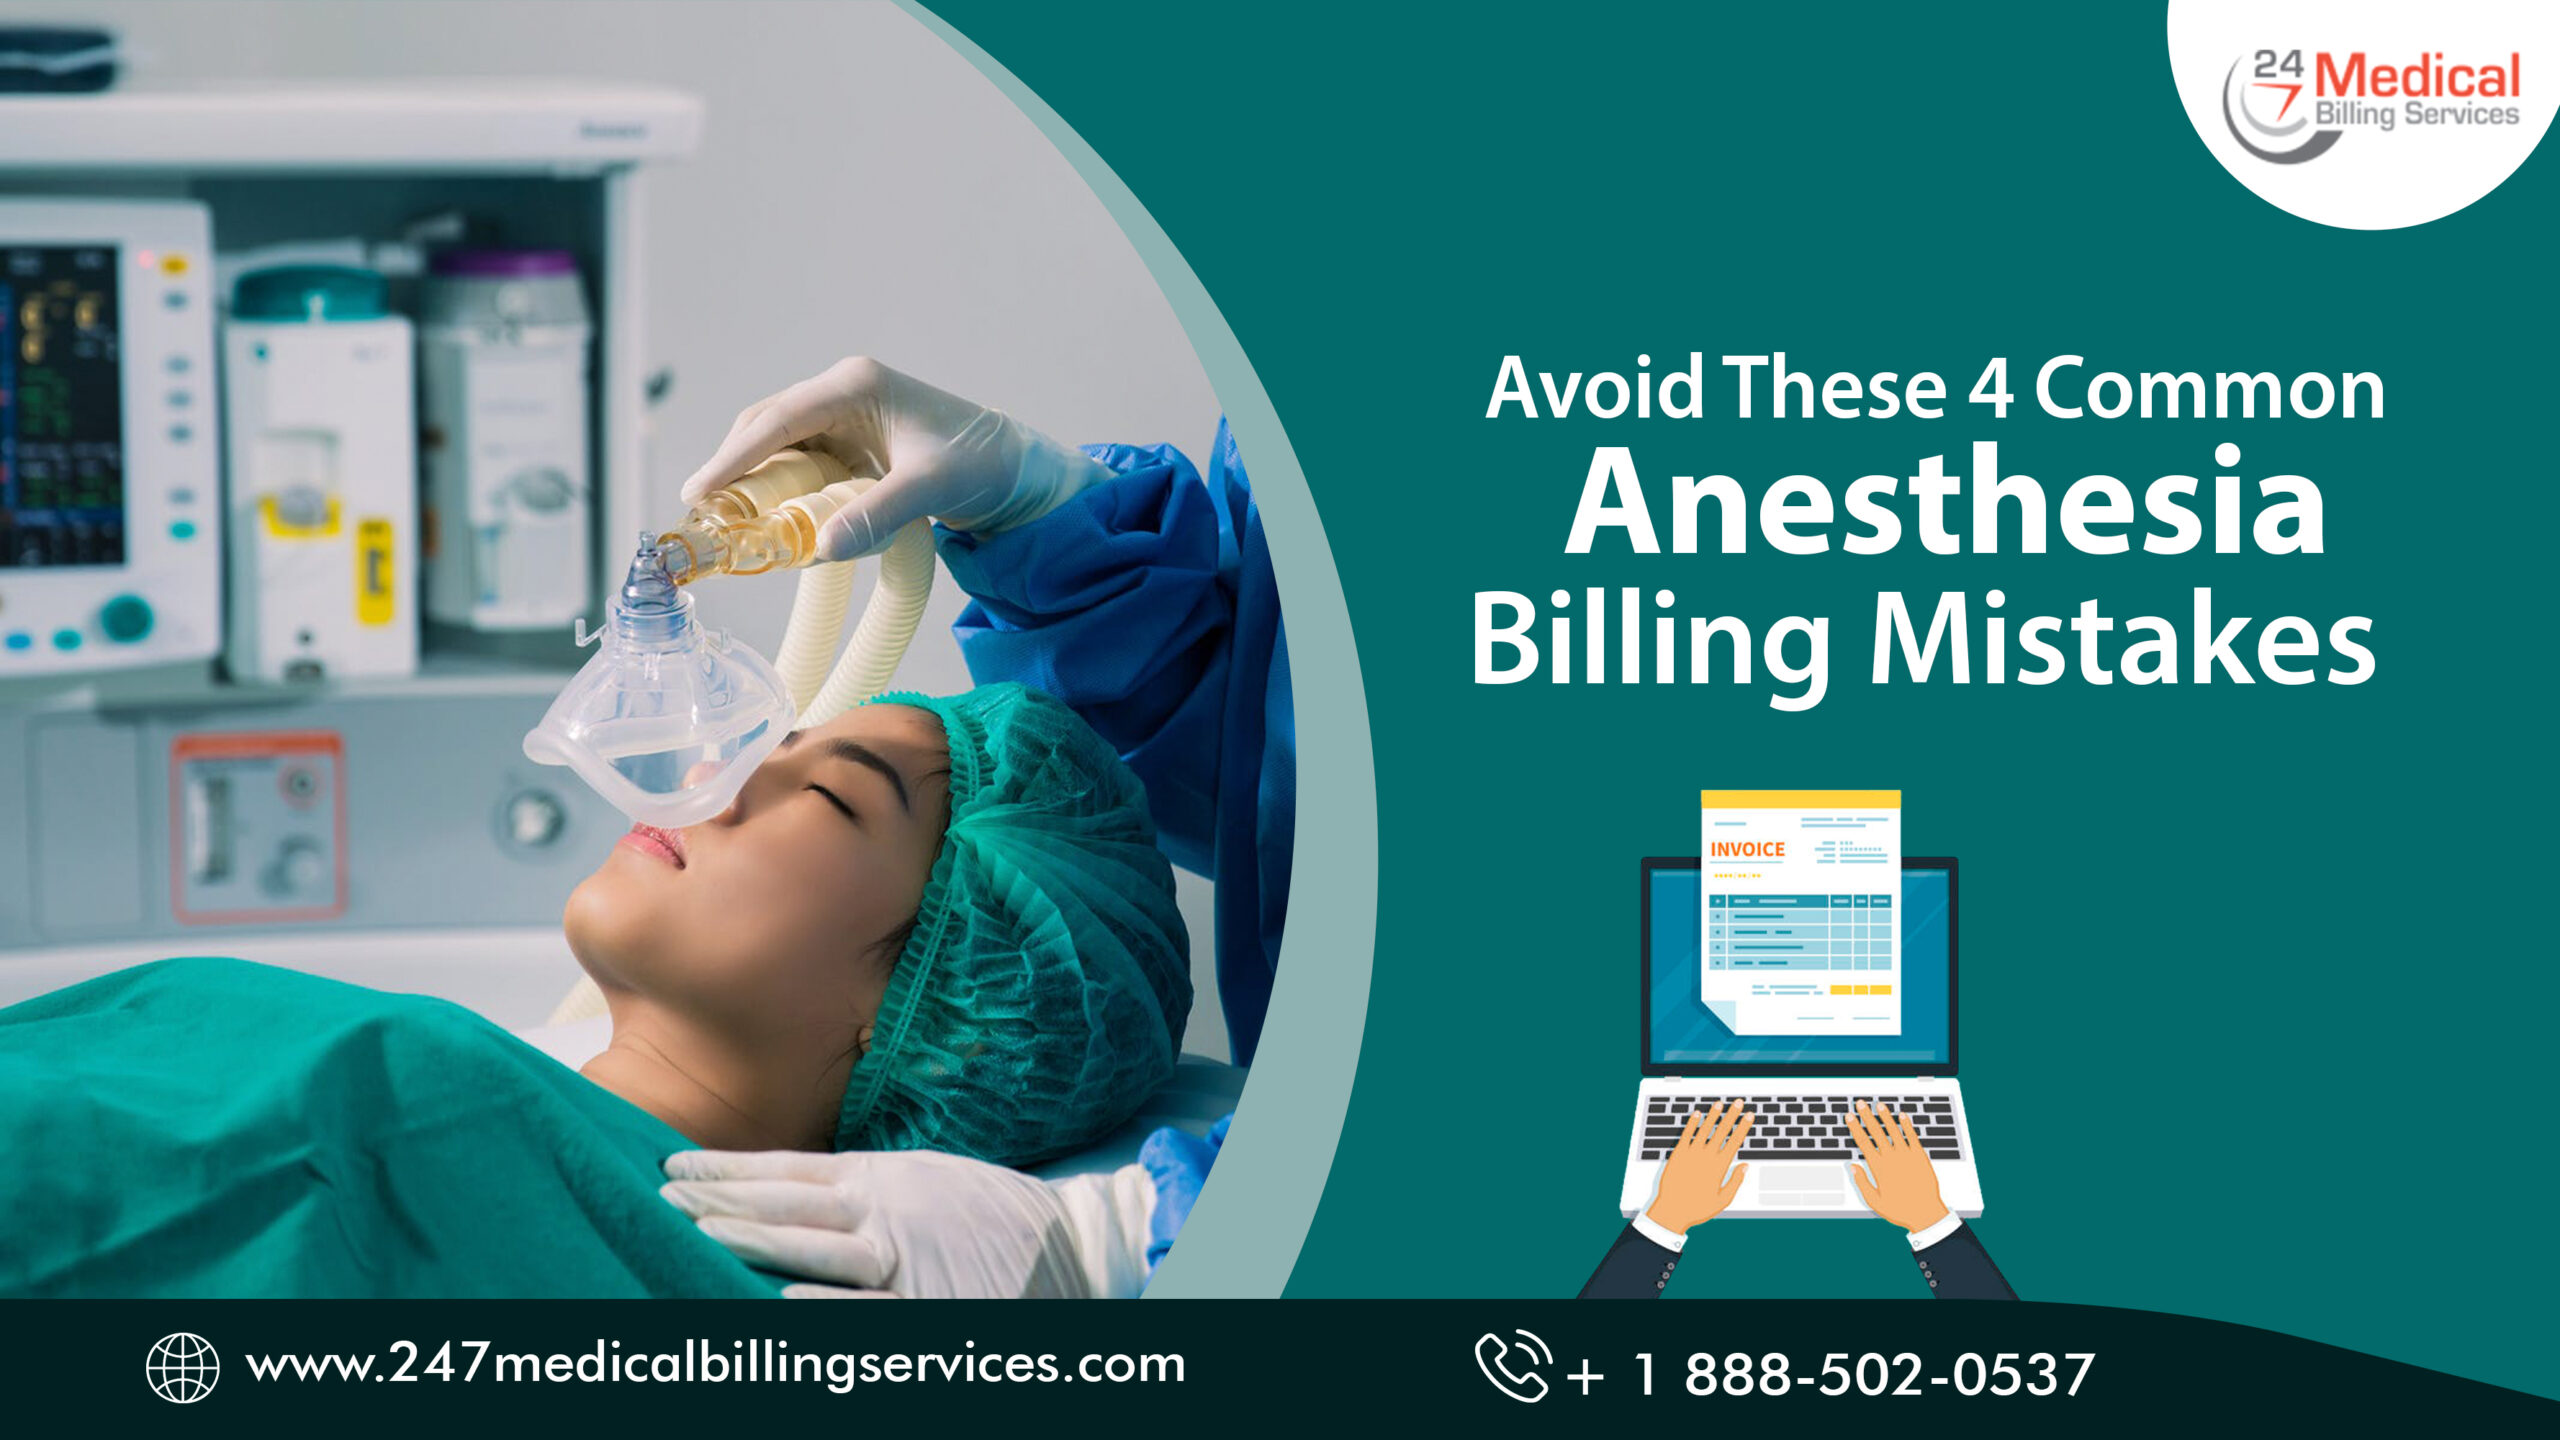  Avoid These 4 Common Anesthesia Billing Mistakes